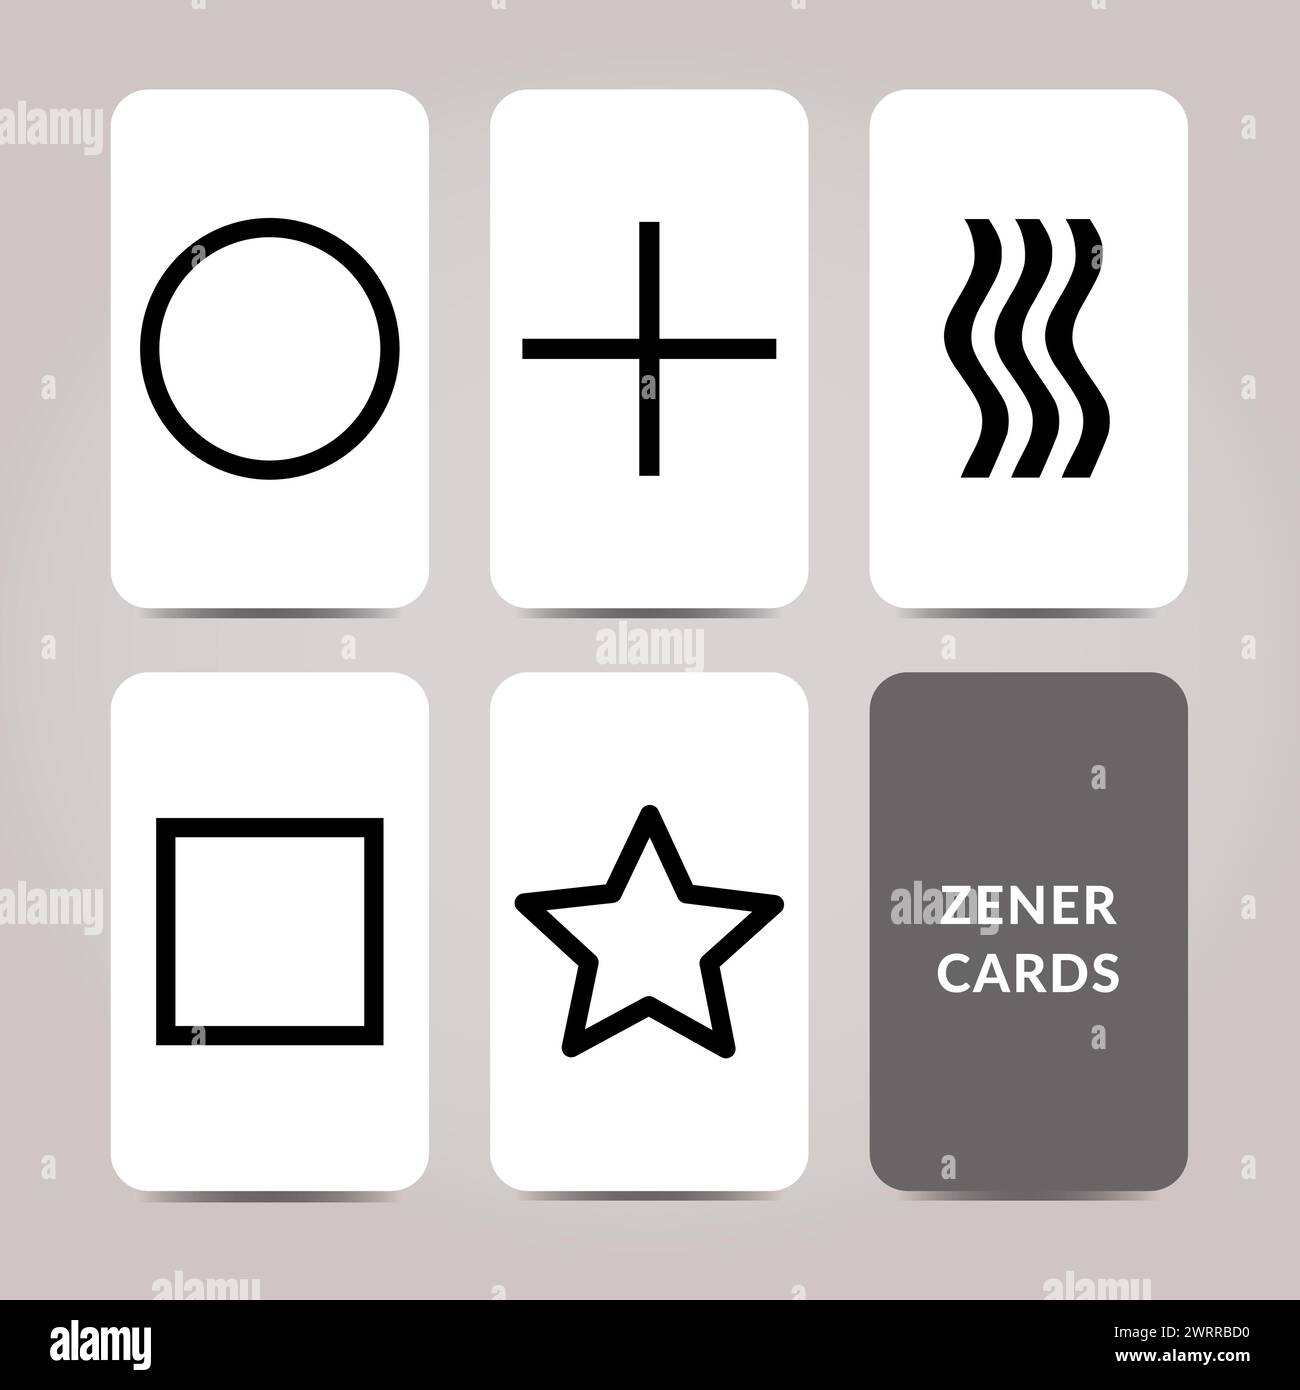 Zener Cards Deck - 5 Elements Vector Illustration - Tool Method for Telepathy Testing - Circle, Plus, Waves, Square and Star Symbols Black and White Stock Vector